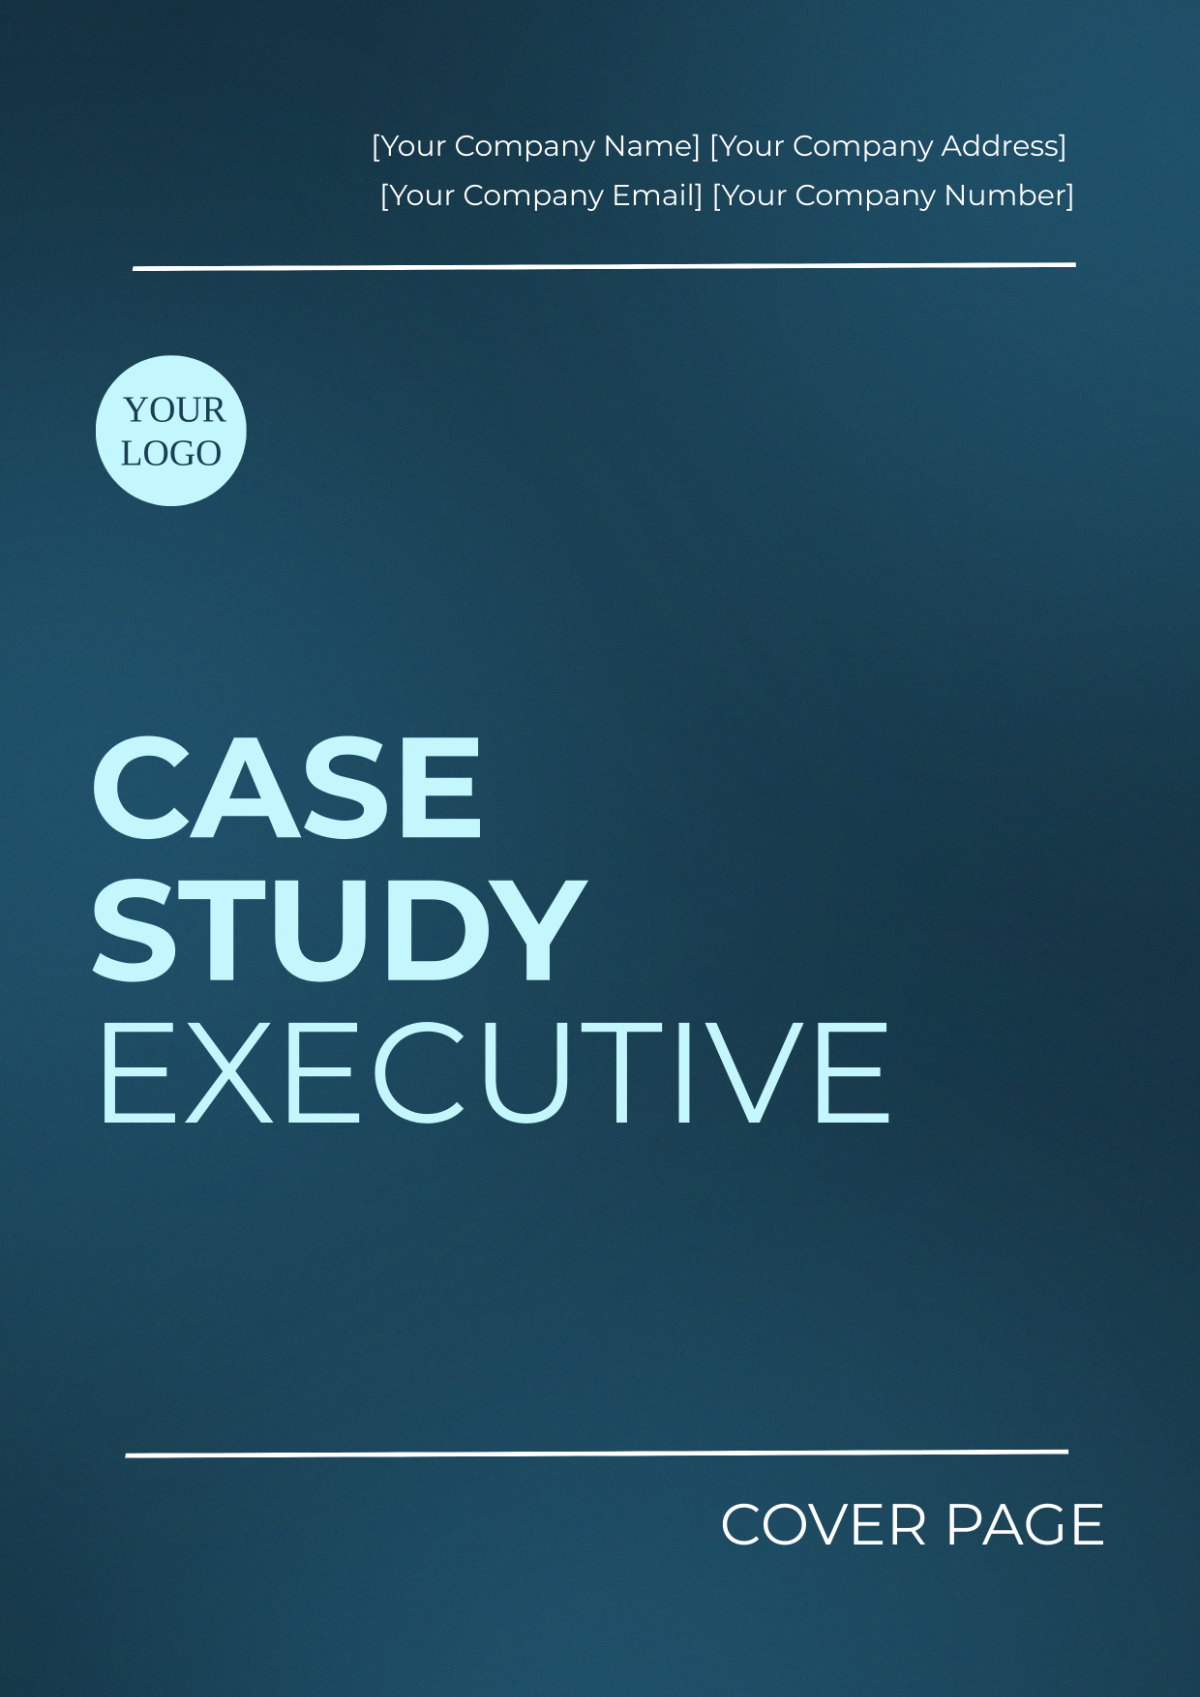 Case Study Executive Cover Page